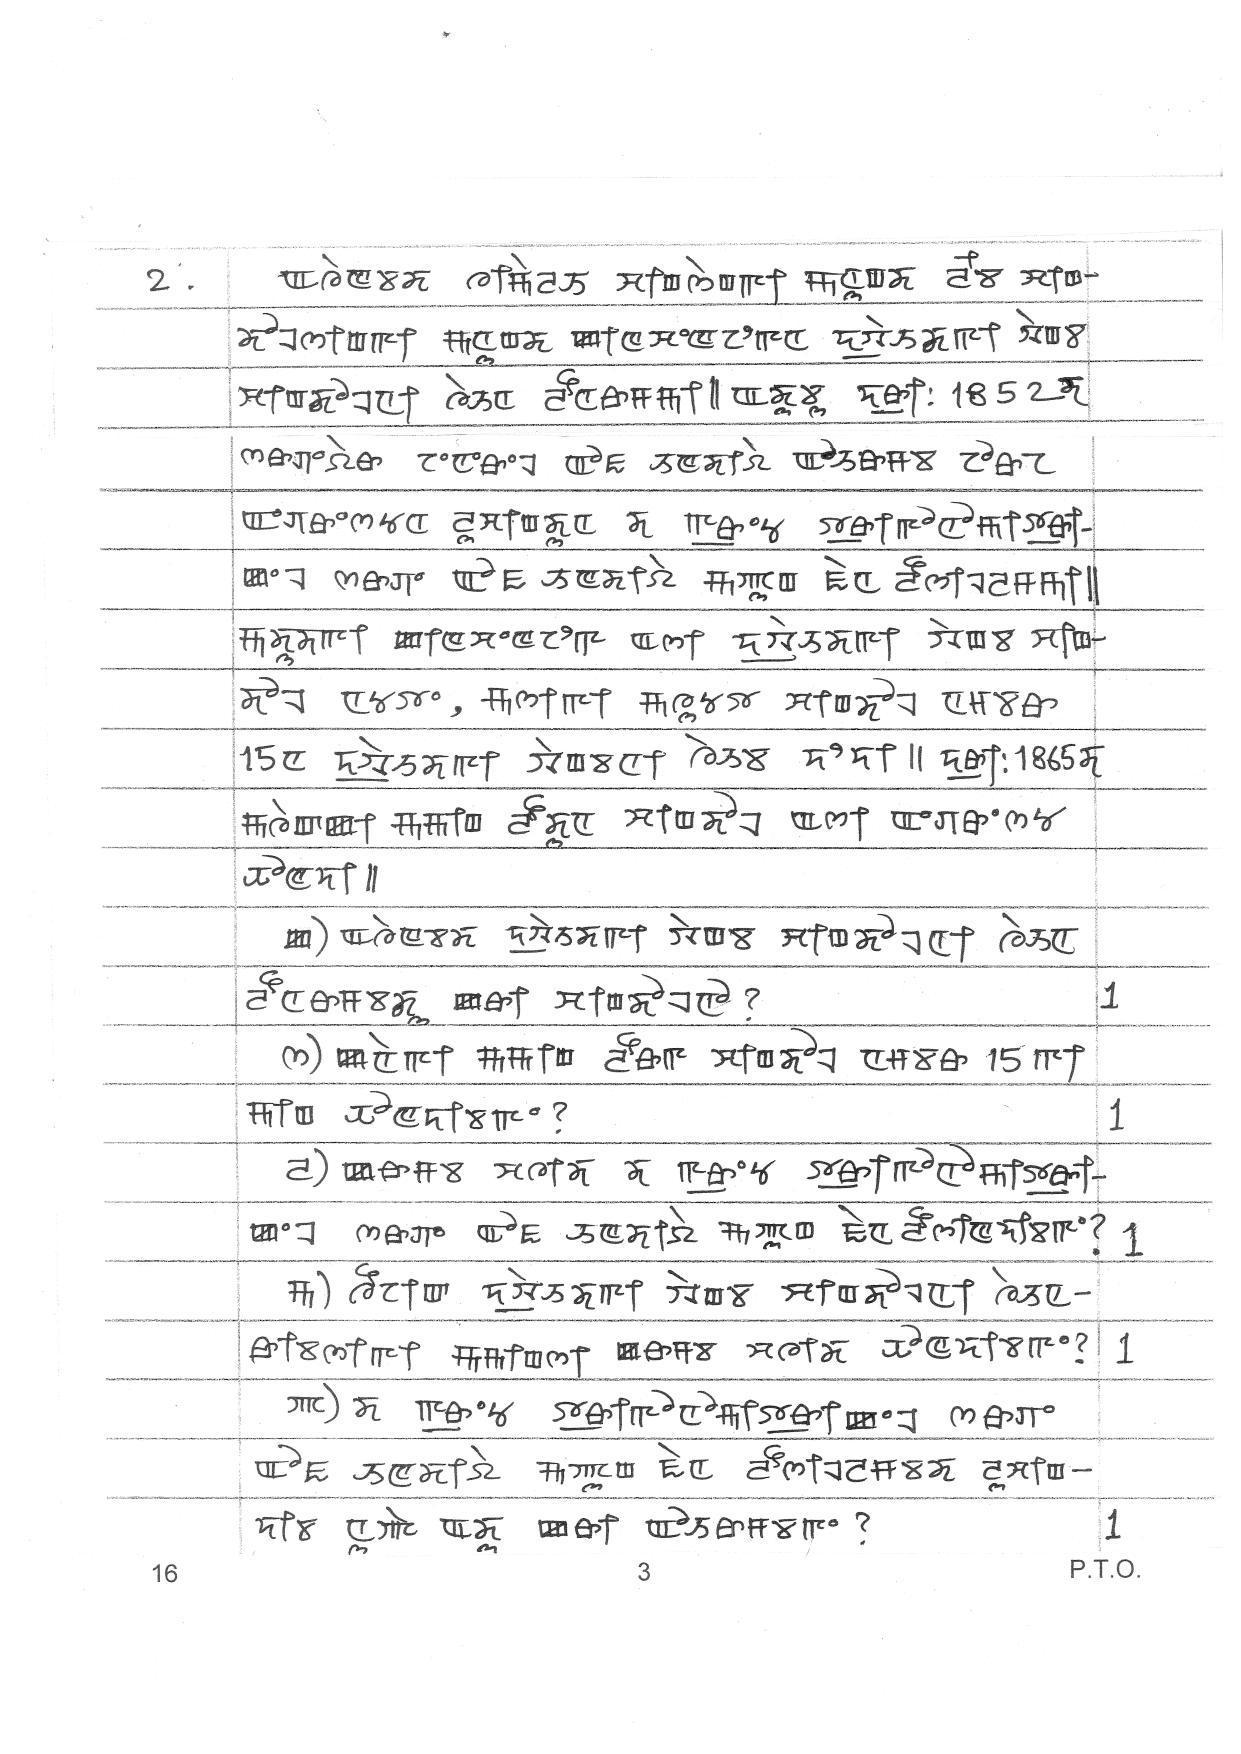 CBSE Class 10 16 Manipuri 2019 Compartment Question Paper - Page 3